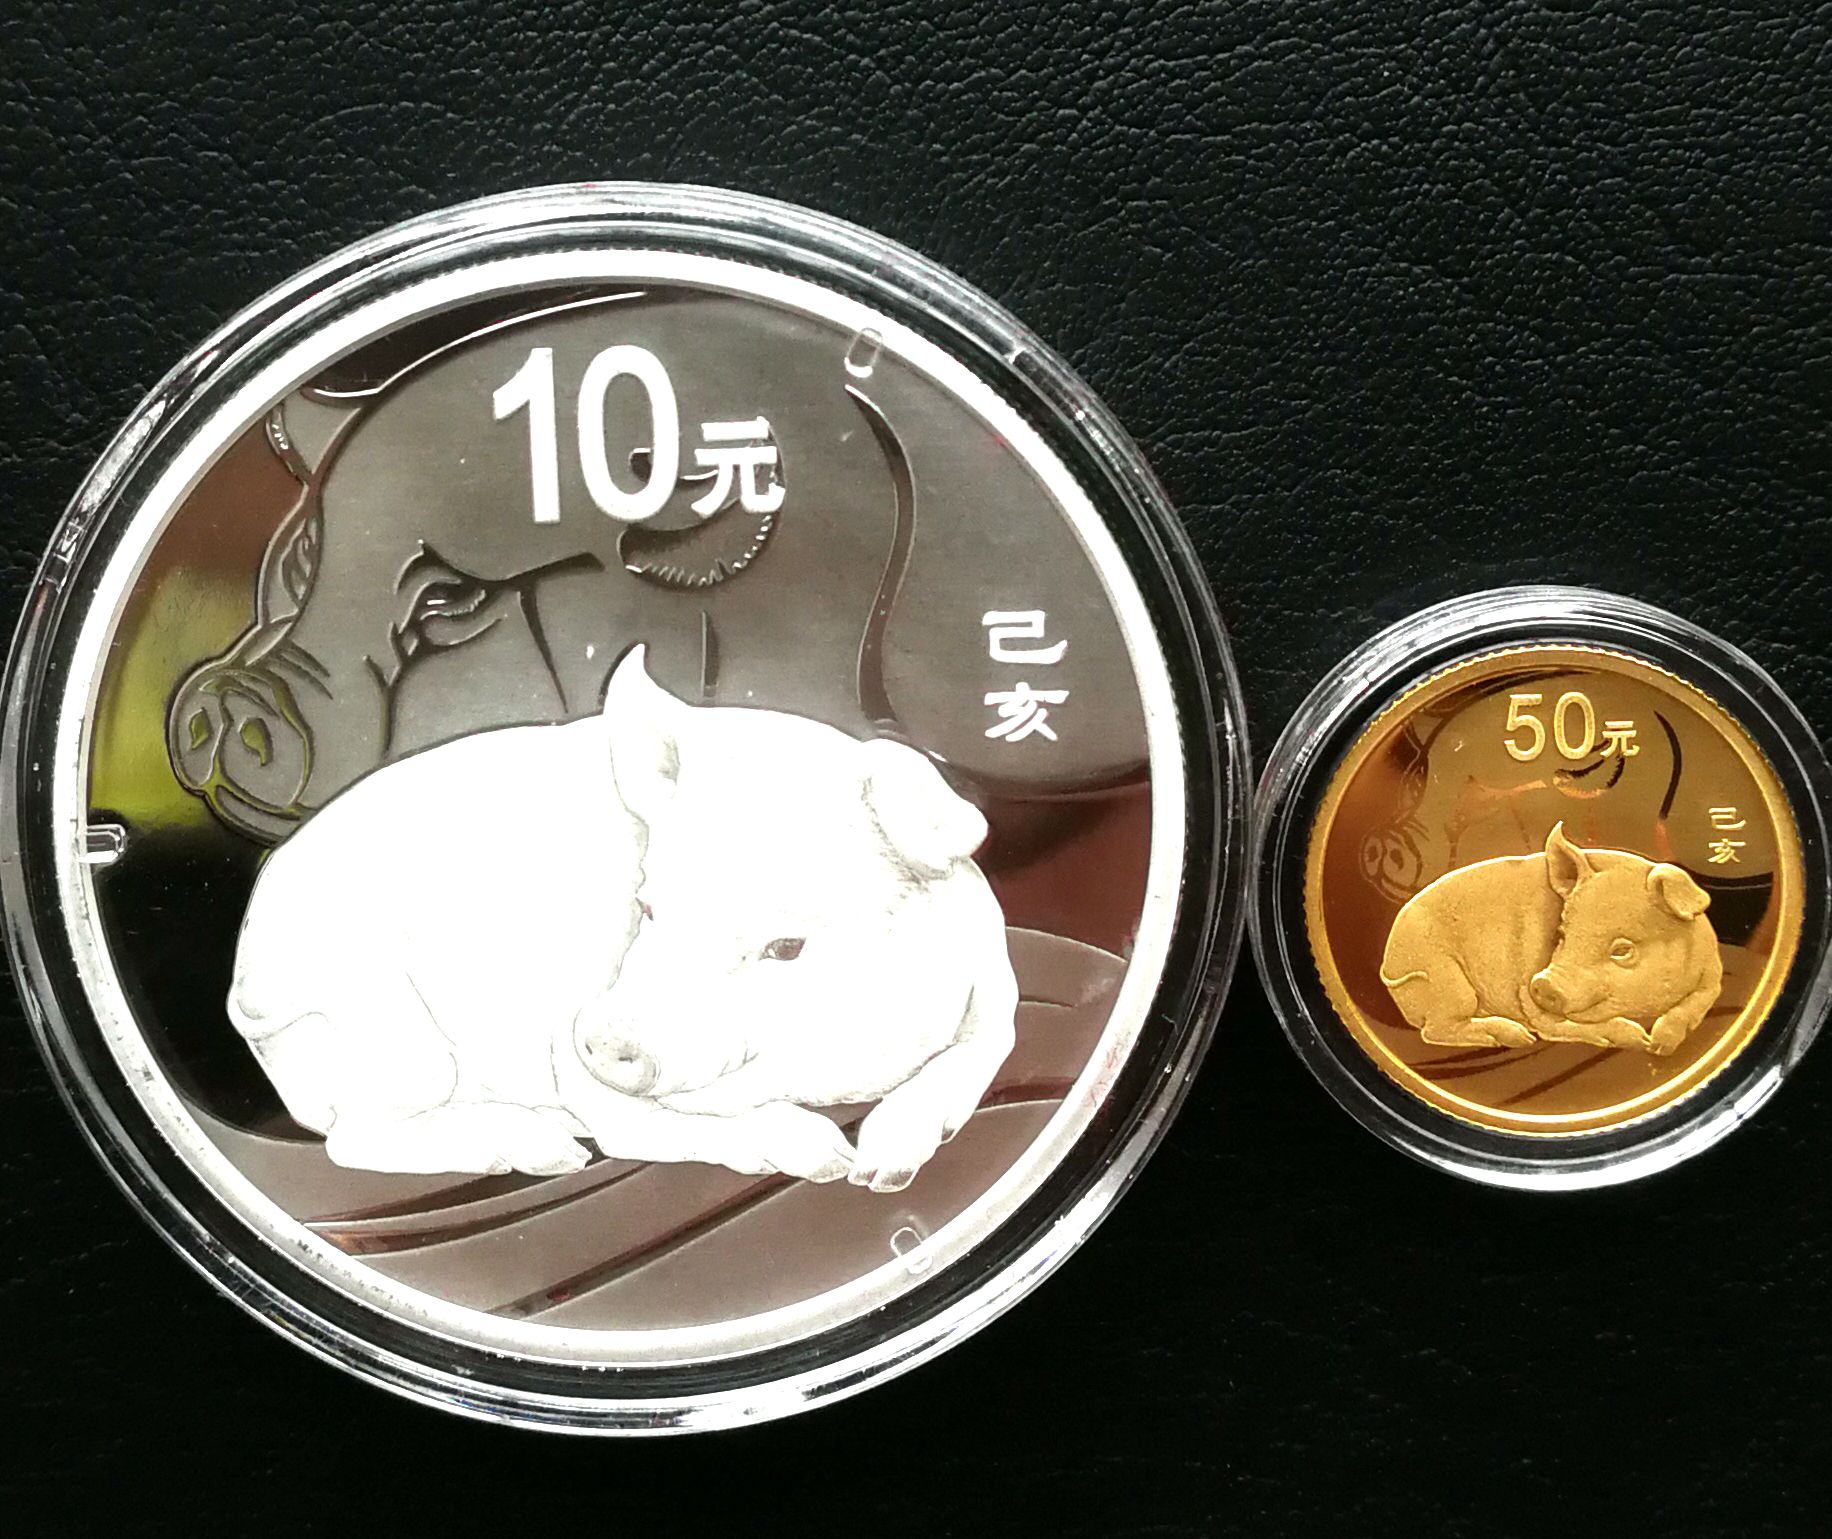 P6103, China 2019 Year of the Pig Gold and Silver Coins, 2 Pcs with Box